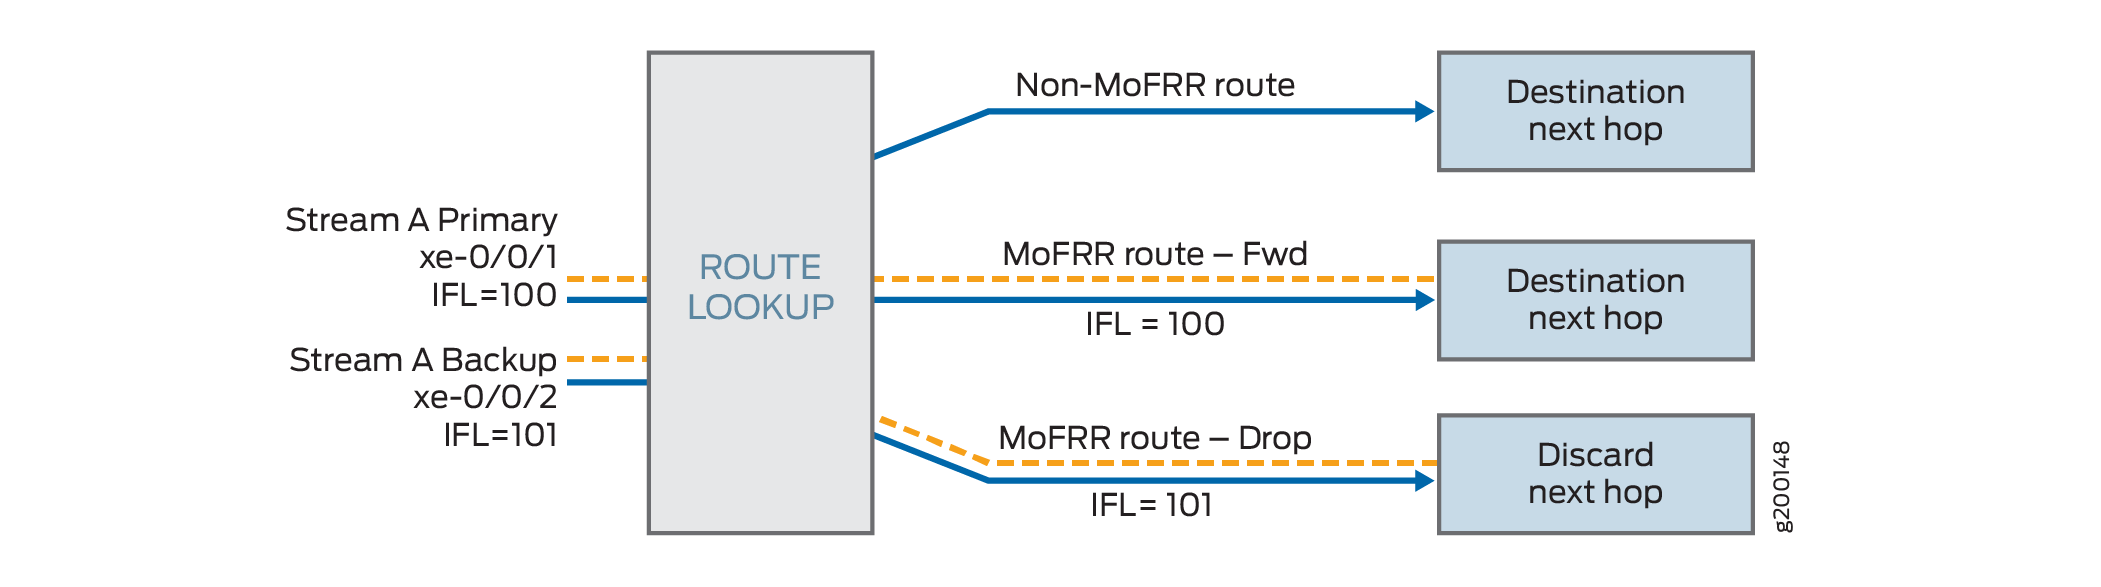 MoFRR IP Route Handling in the Packet Forwarding Engine on Switches